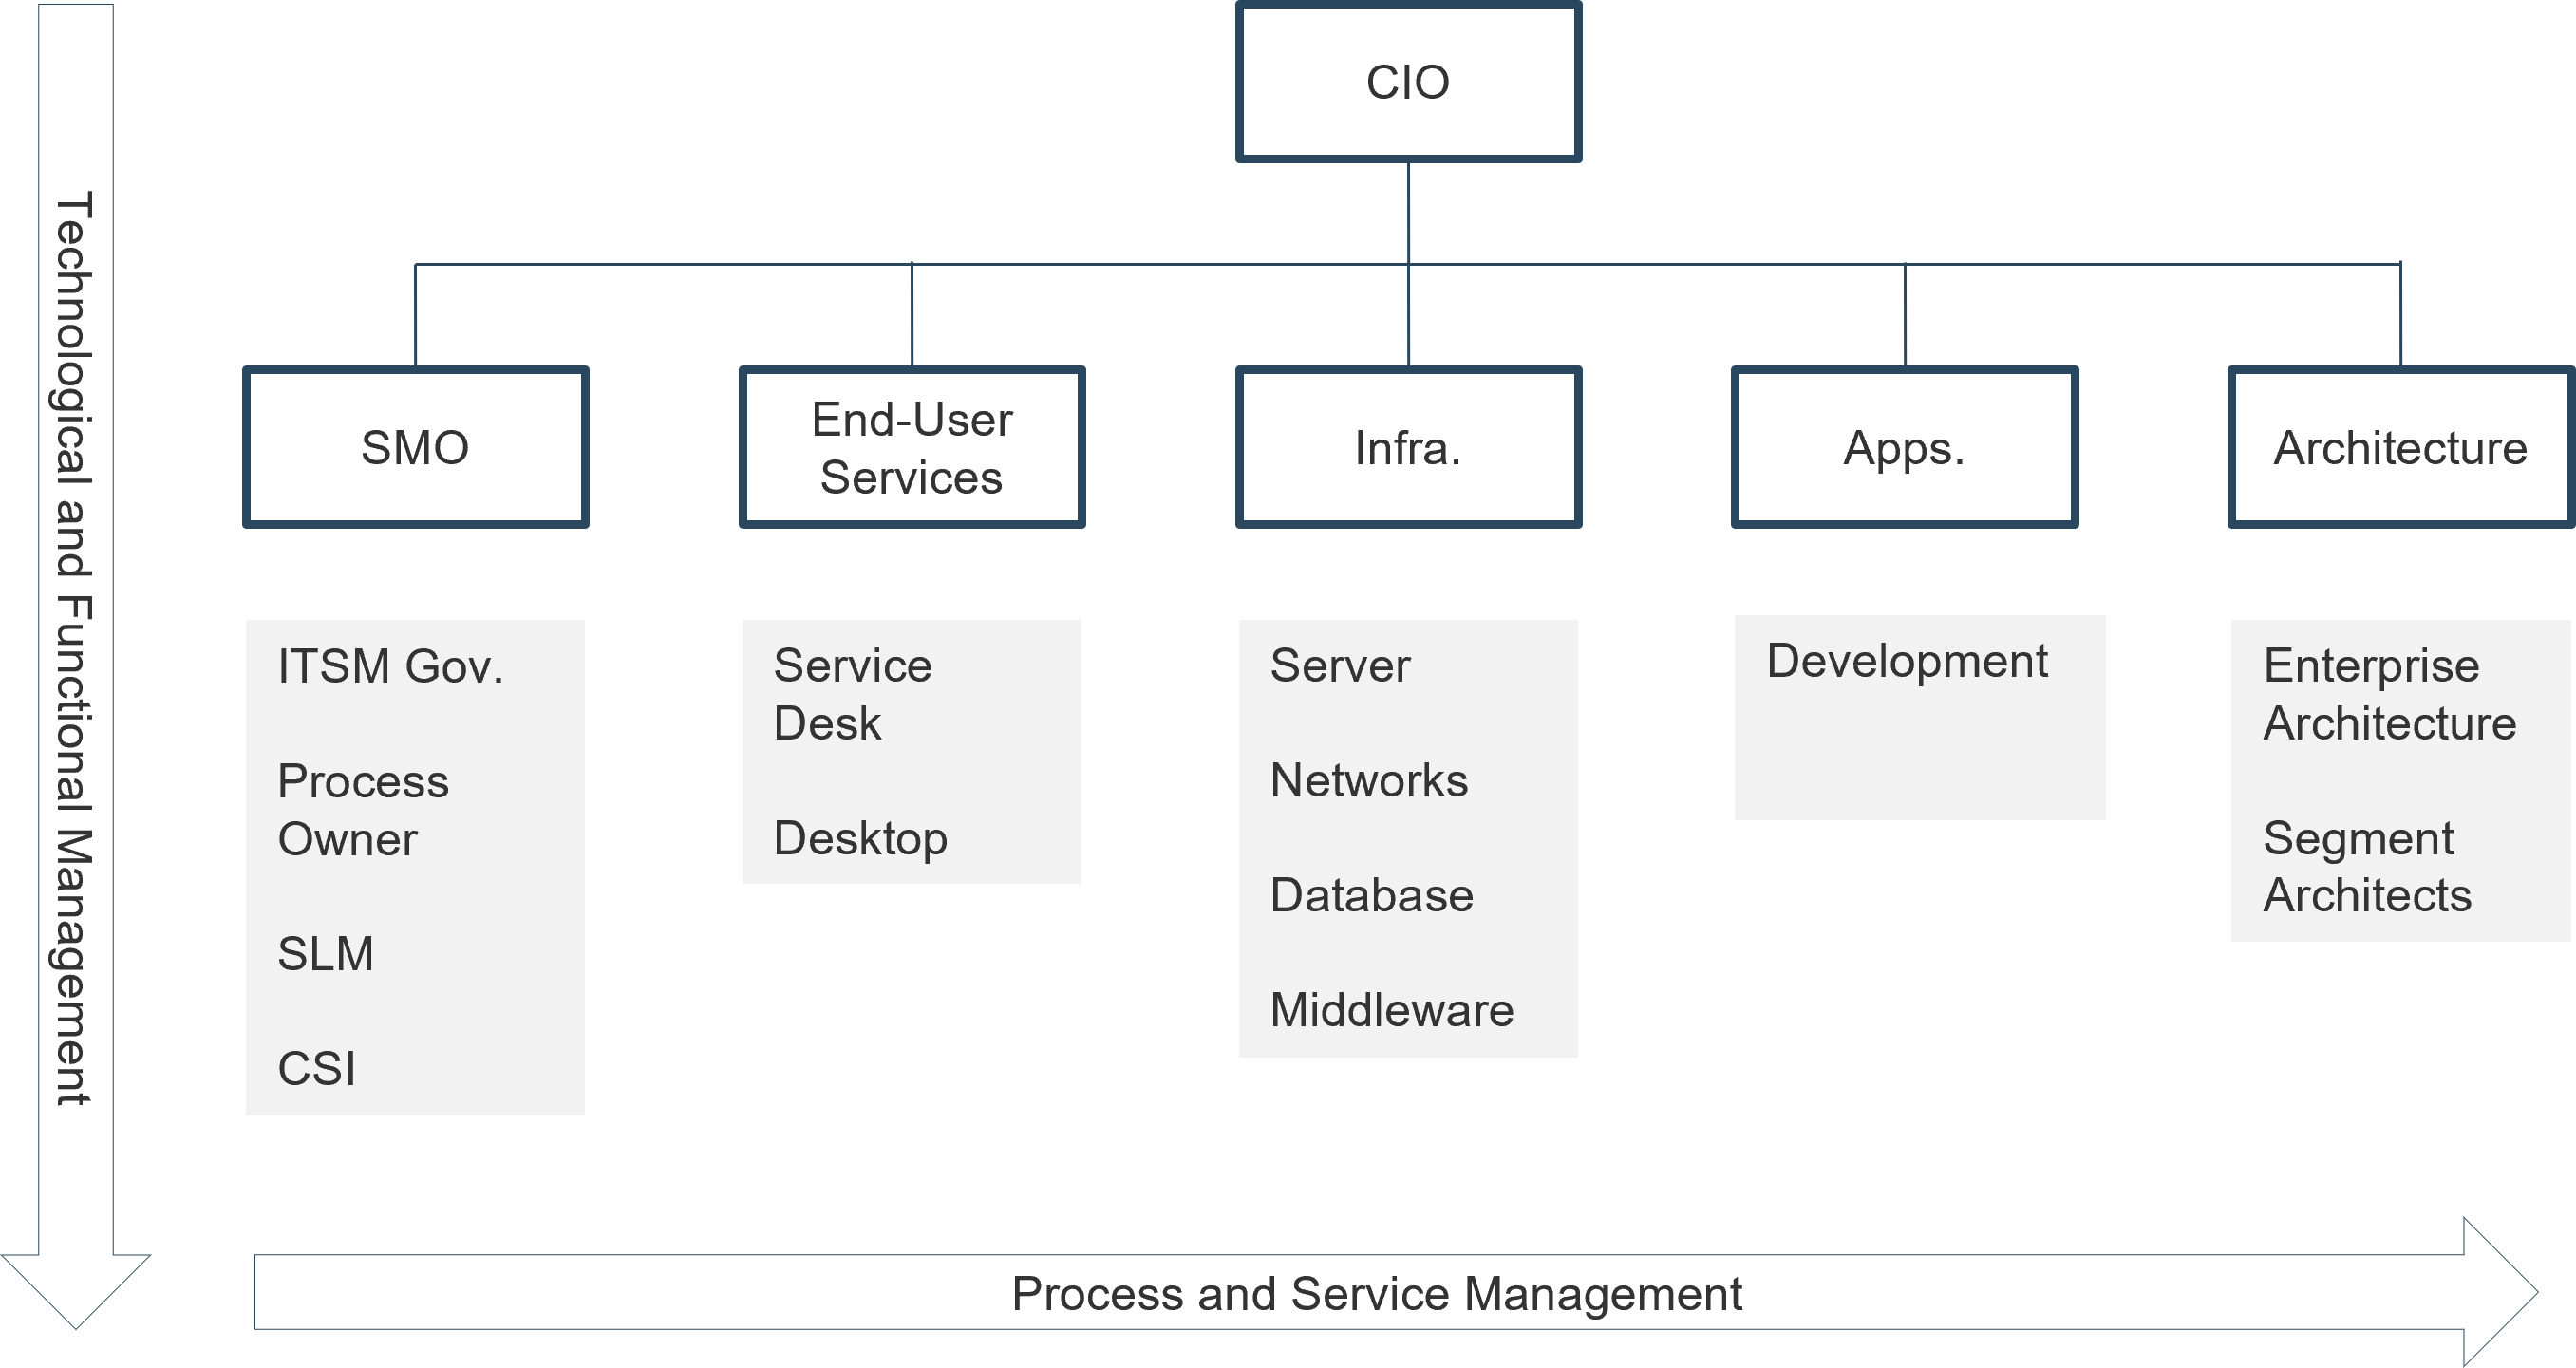 A service management office model is shown. The CIO is at the top with the following branches below it: SMO, End-User Services, Infra., Apps., and Architecture.